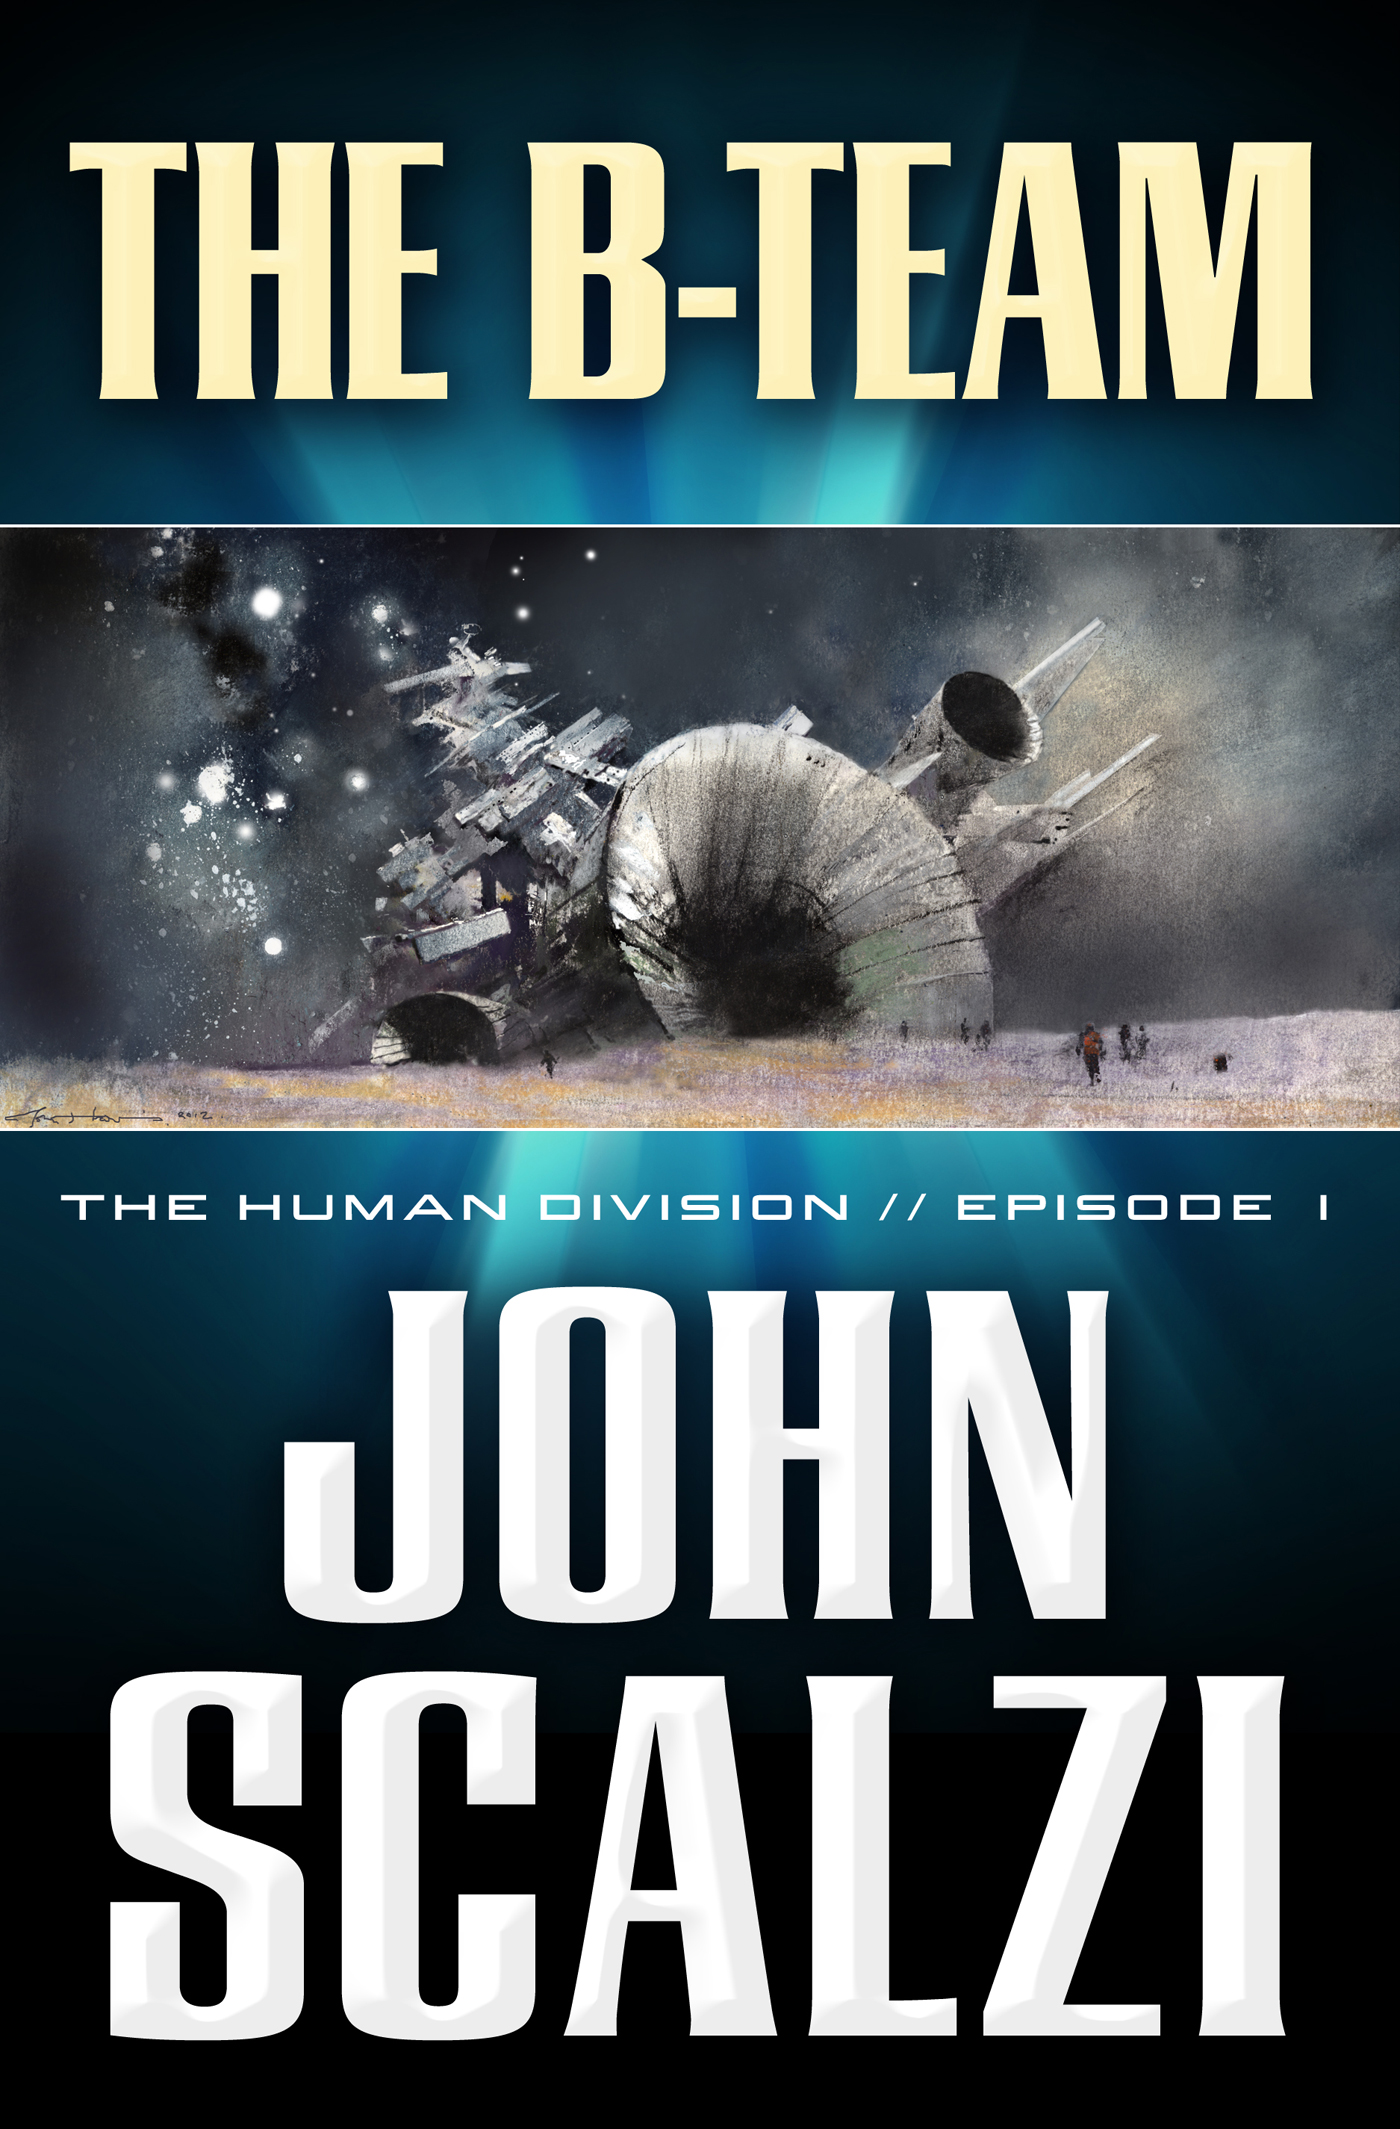 The Human Division #1: The B-Team by John Scalzi